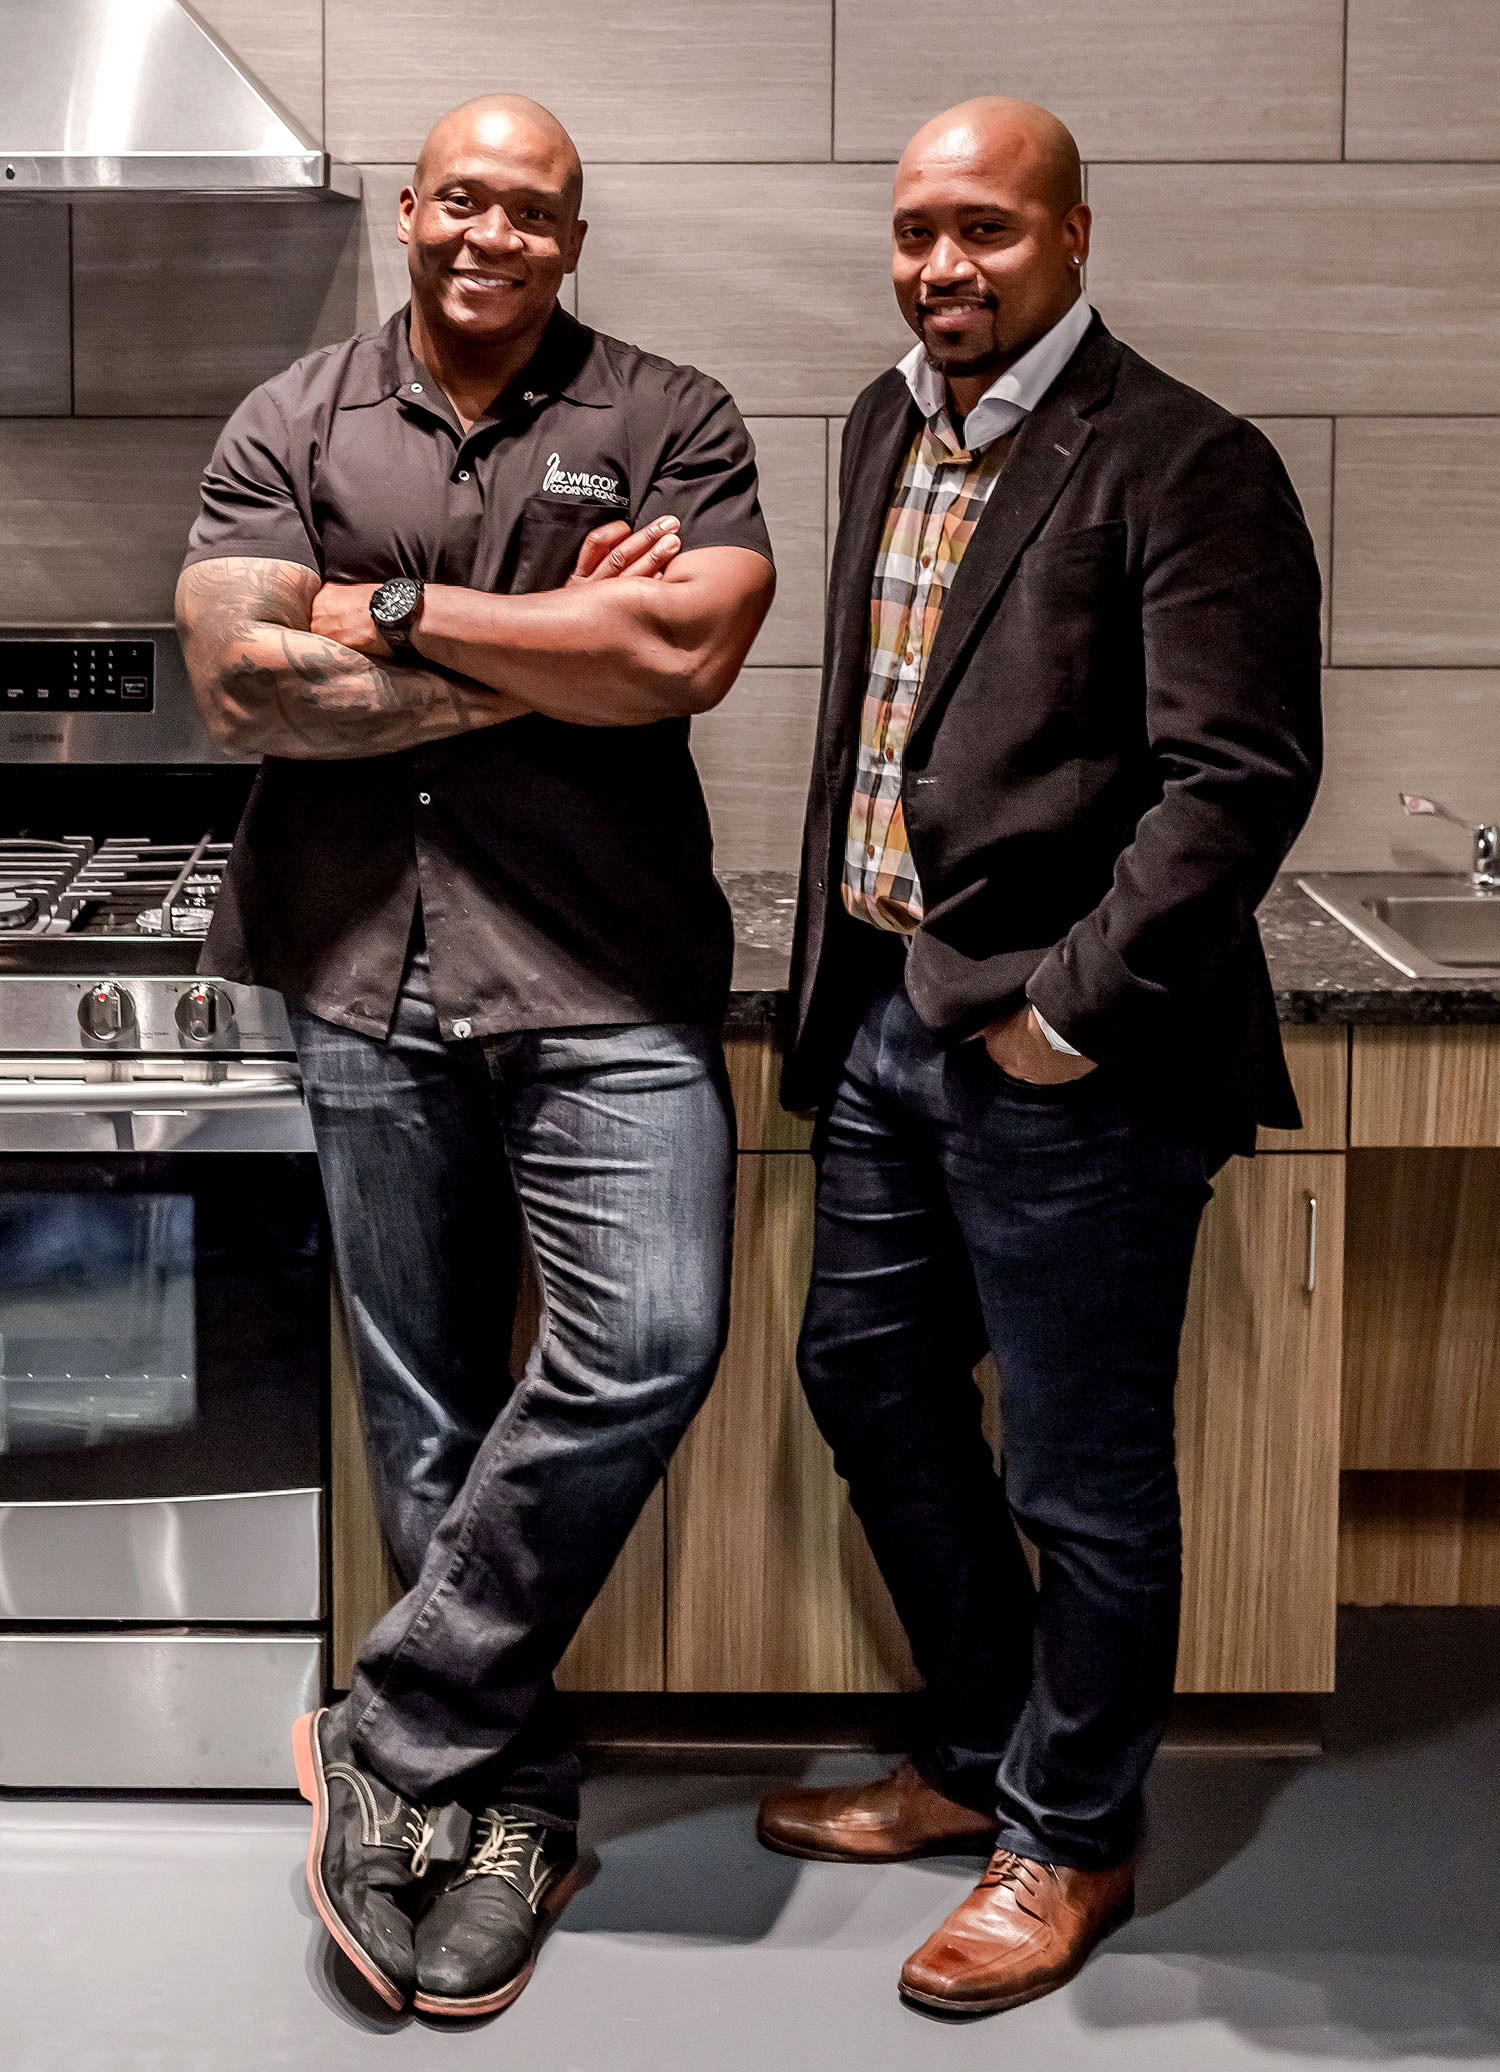 TRE-WILCOX-COOKING-CONCEPTS-CLASSES-CHEF-DEMOS-PLANO-MAGAZINE-KENNY-WYNN2